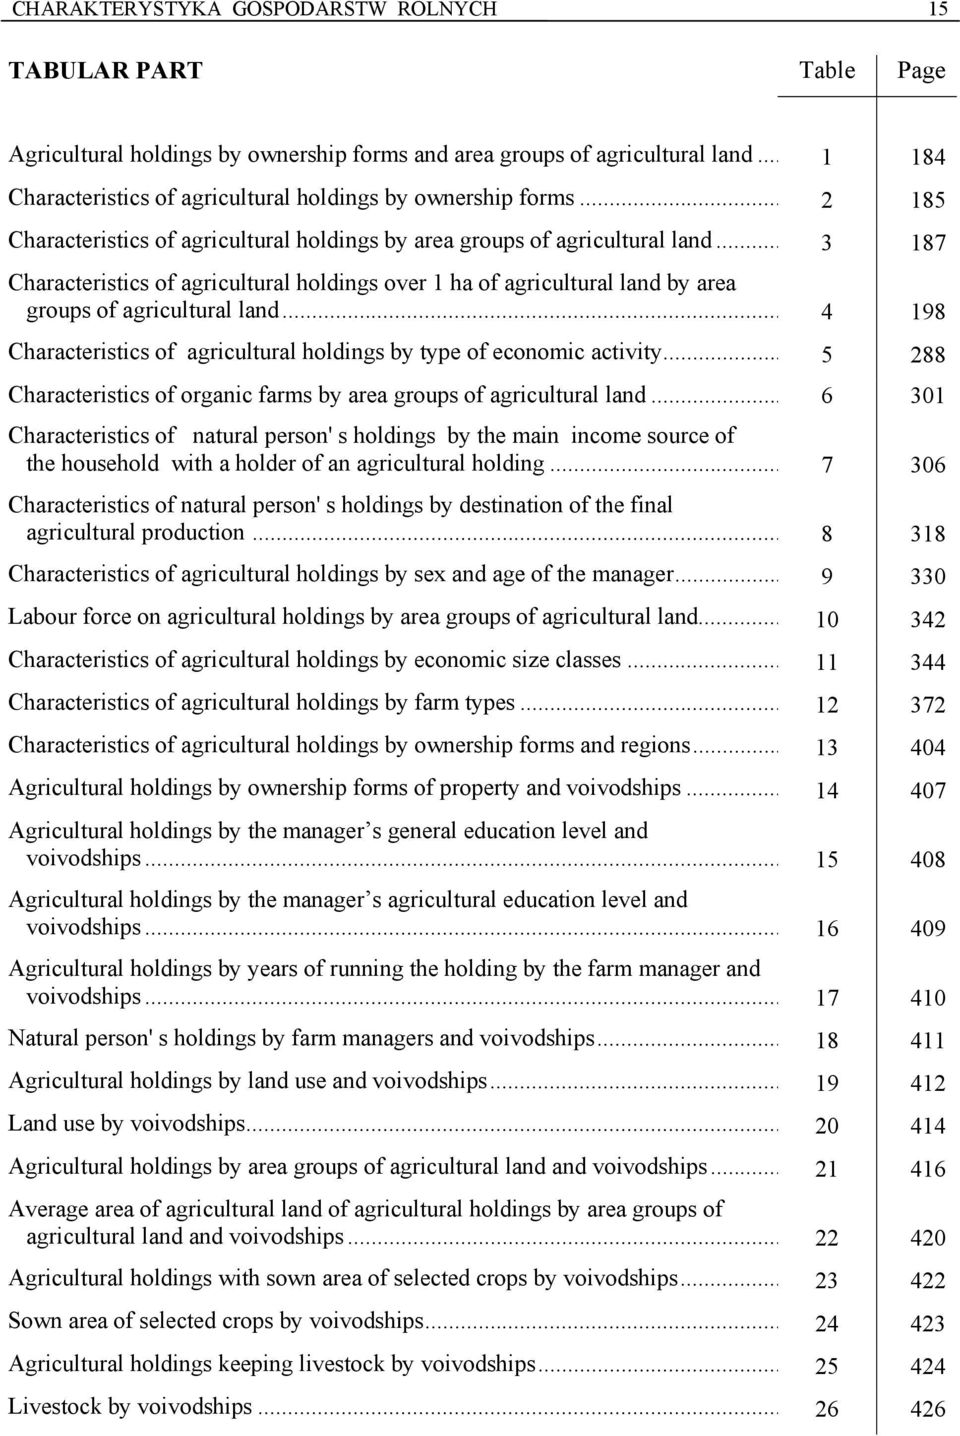 .. 3 187 Characteristics of agricultural holdings over 1 ha of agricultural land by area groups of agricultural land... 4 198 Characteristics of agricultural holdings by type of economic activity.